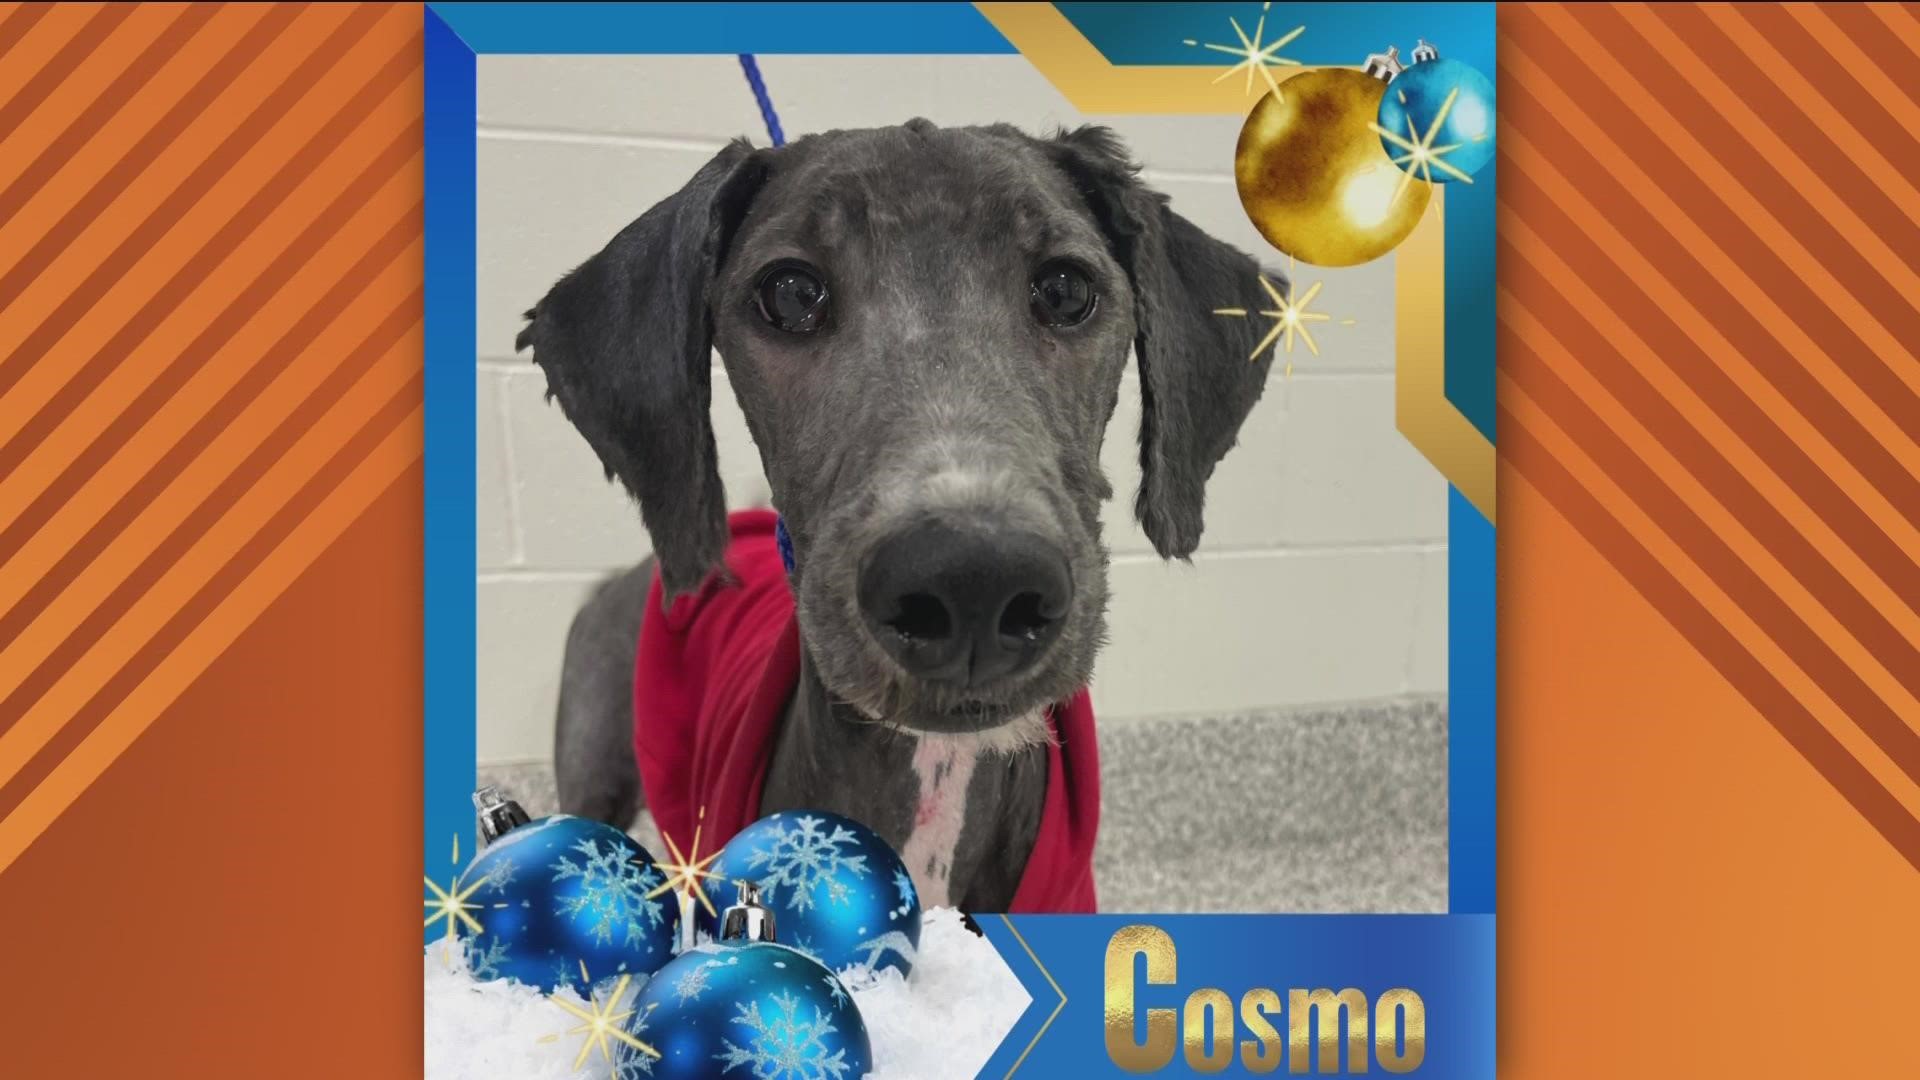 Cosmo is a standard poodle looking for adoption.